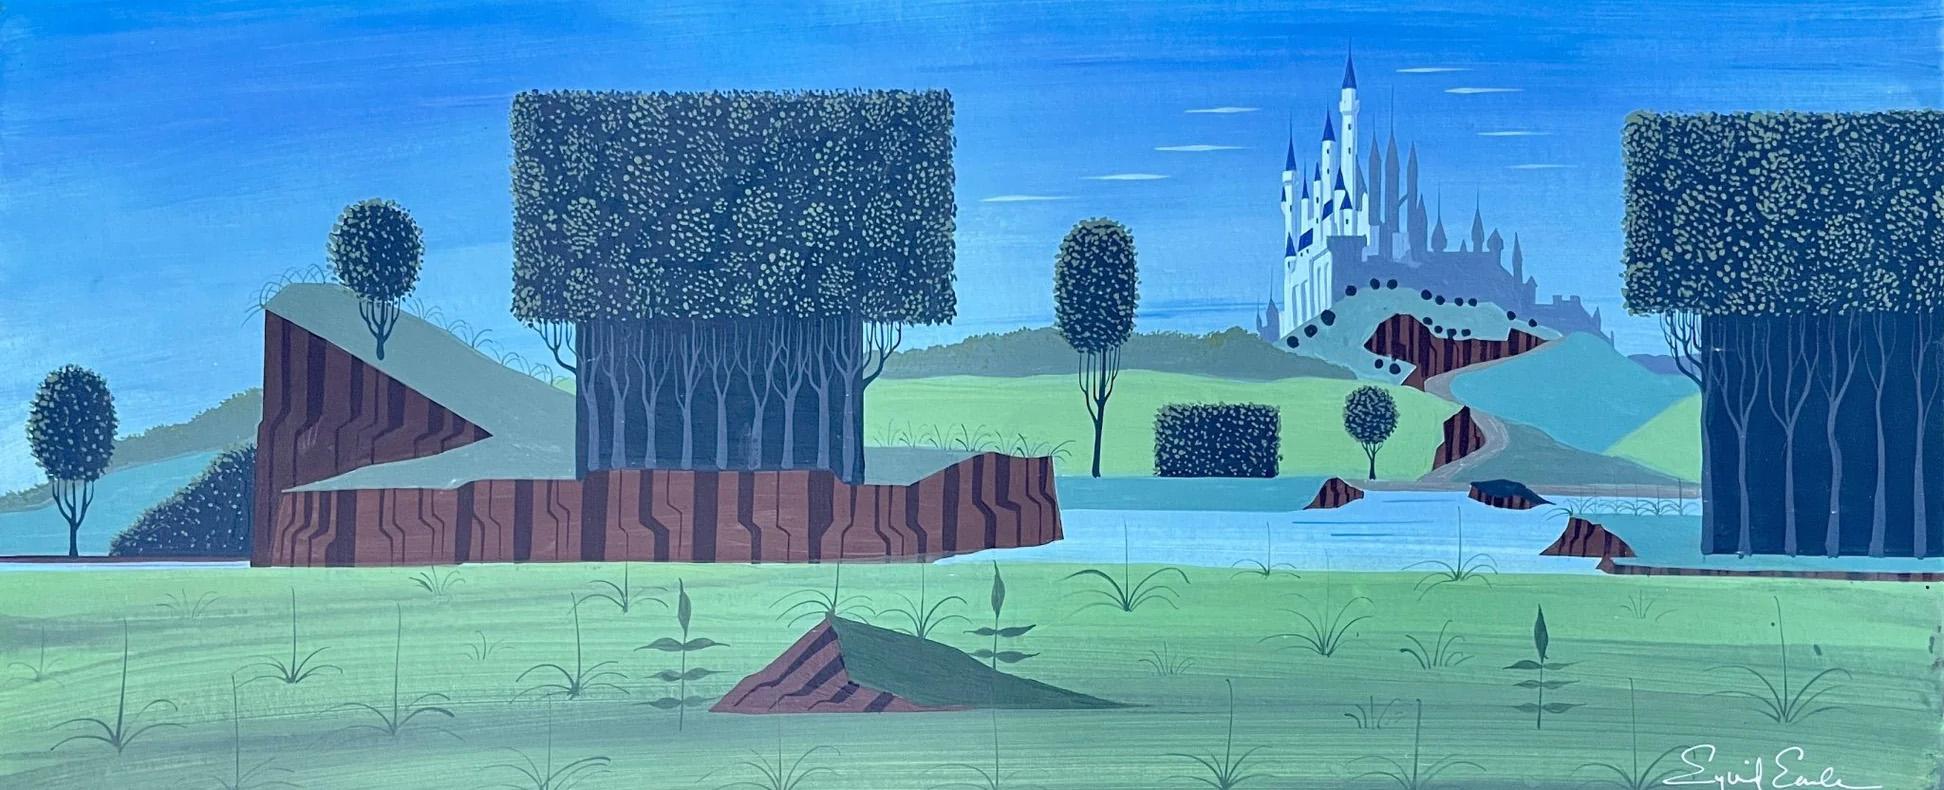 Sleeping Beauty Original Concept Painting: The Castle - Art by Eyvind Earle